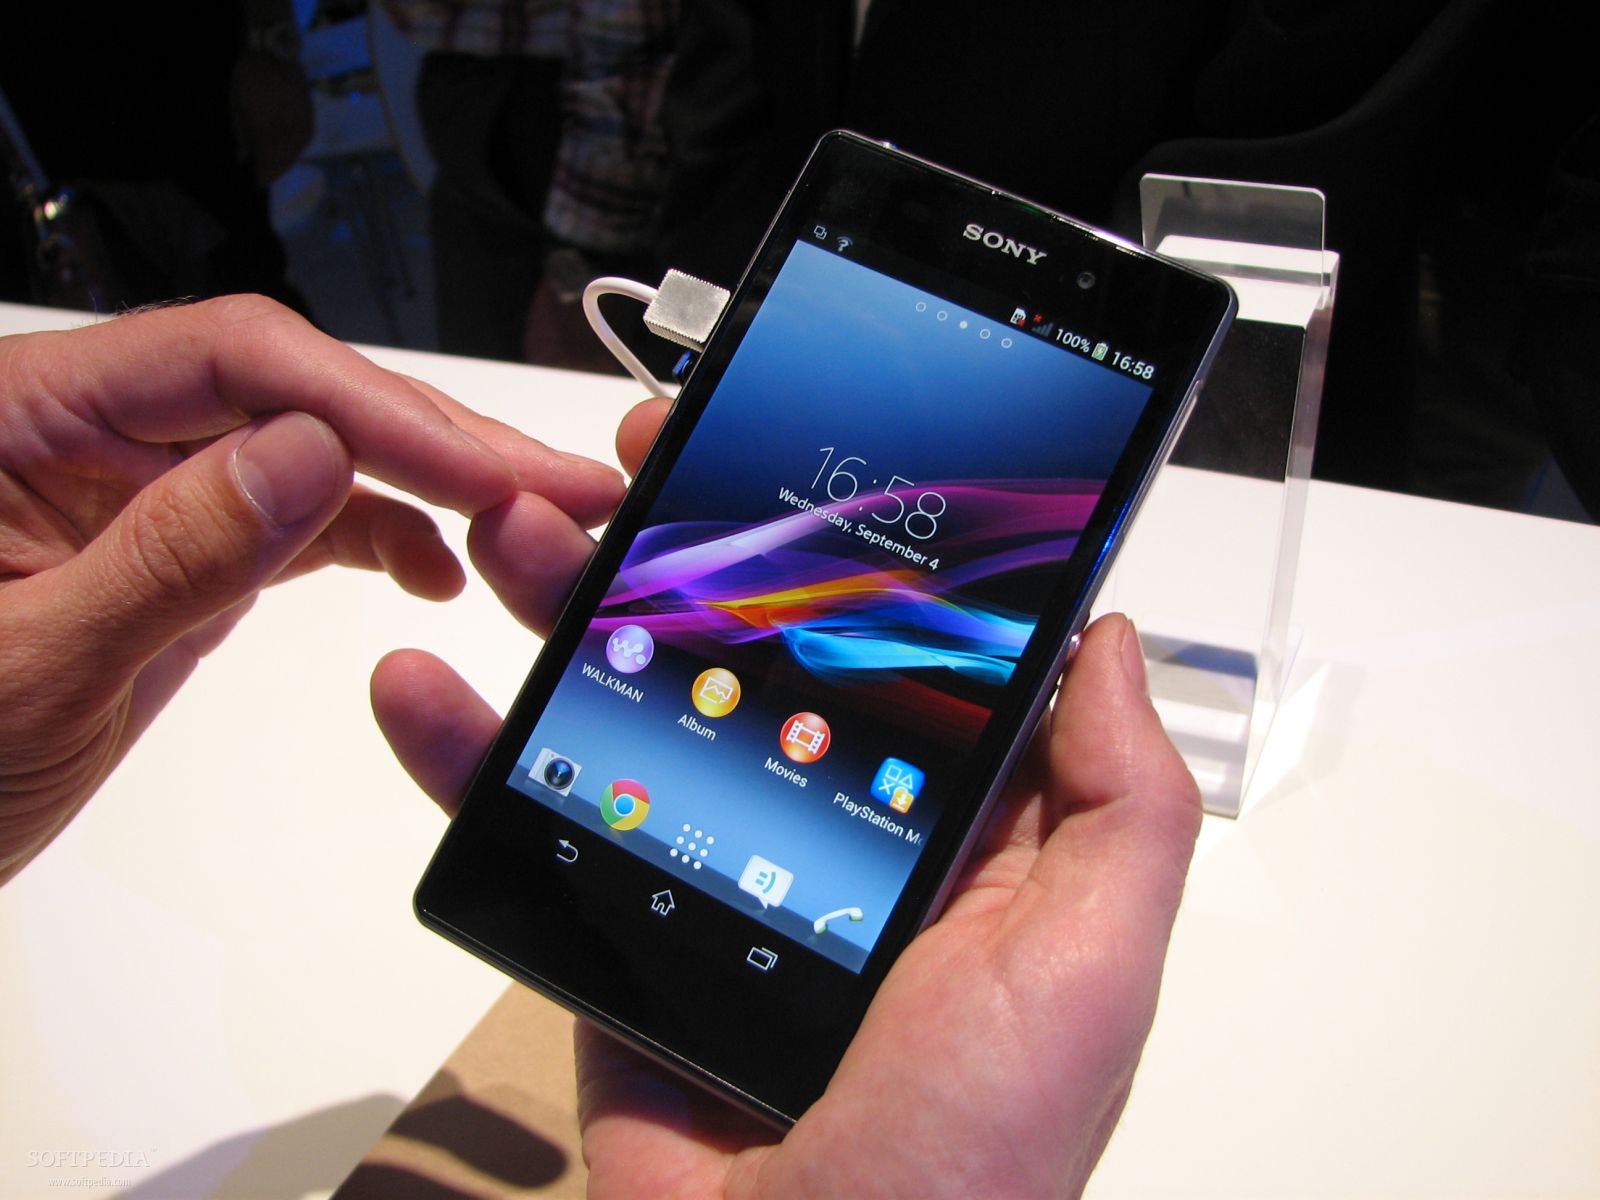 Sony xperia z live chat